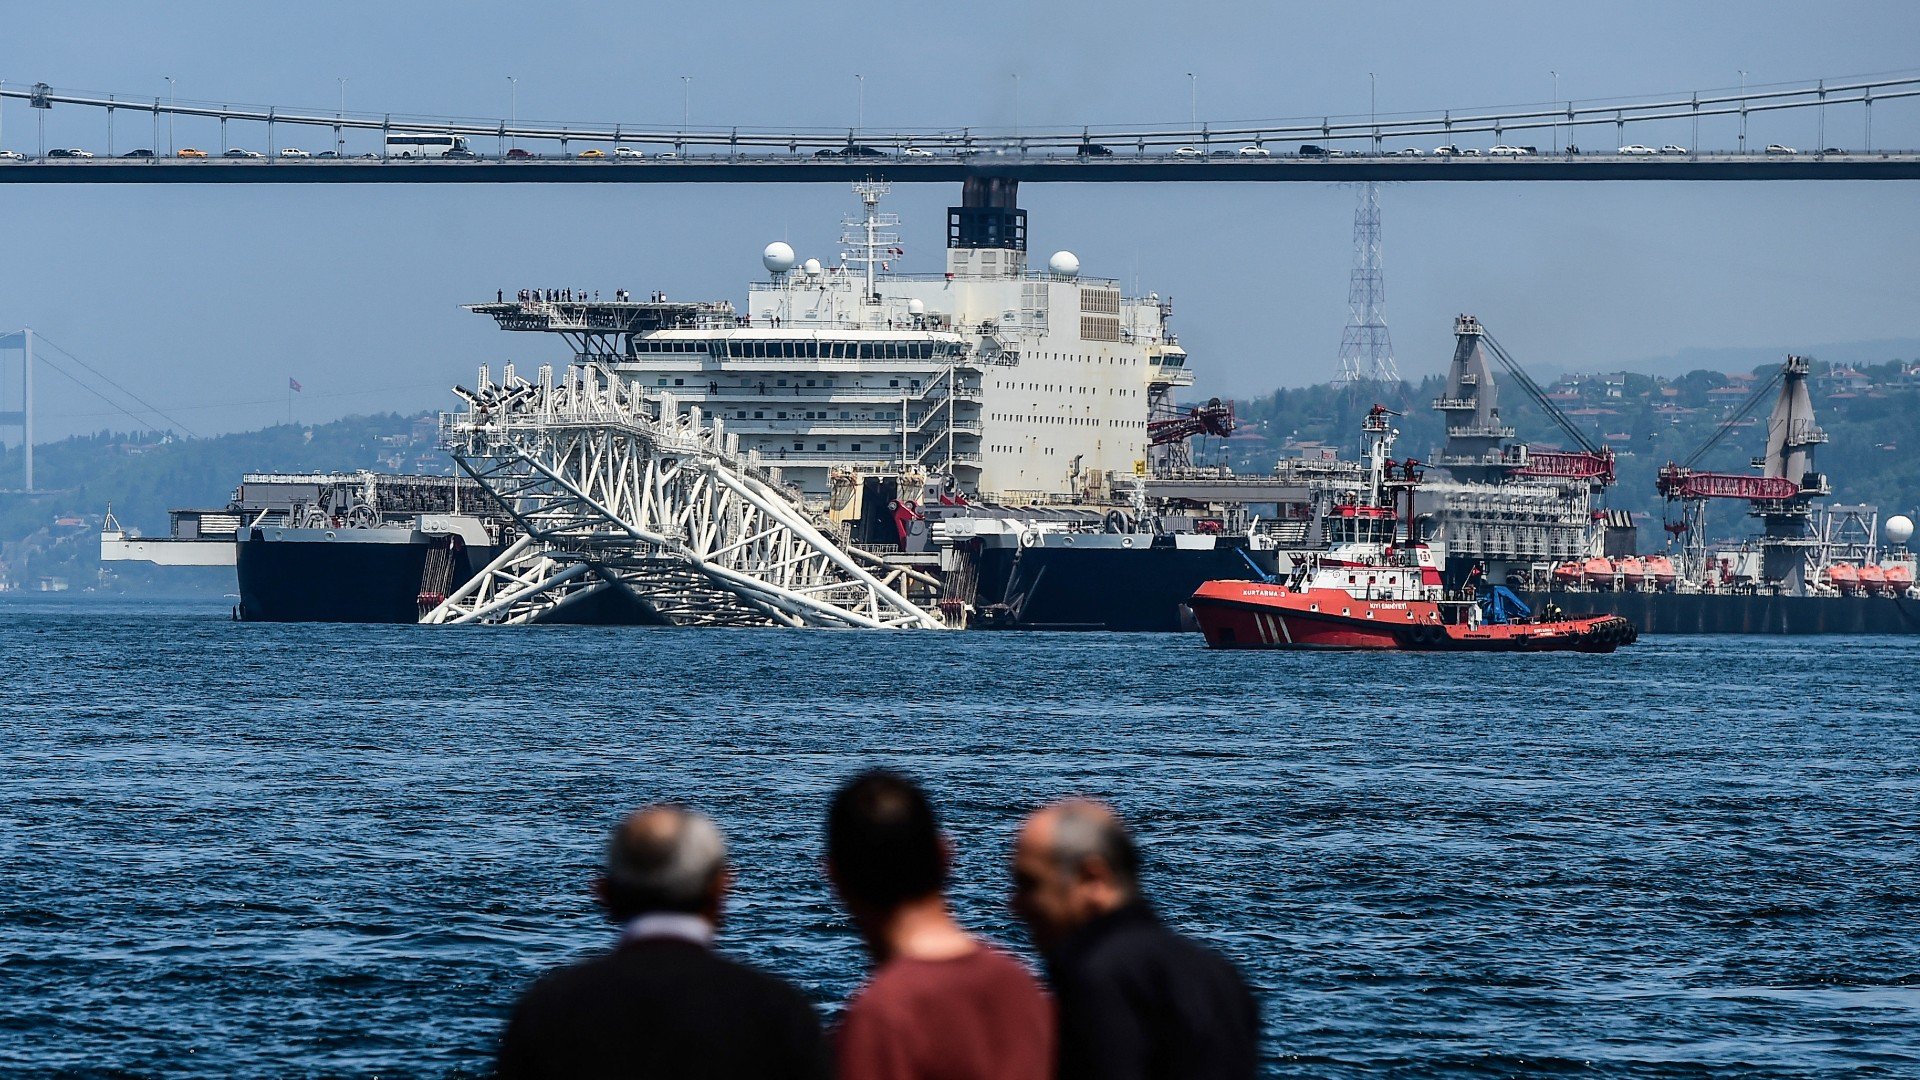 A vessel passes through the Bosphorus following the completion of Line 1 of Gazprom's TurkStream gas pipeline in the Black Sea, connecting Russia and Turkey, in Istanbul, on 2 May, 2018 (AFP)